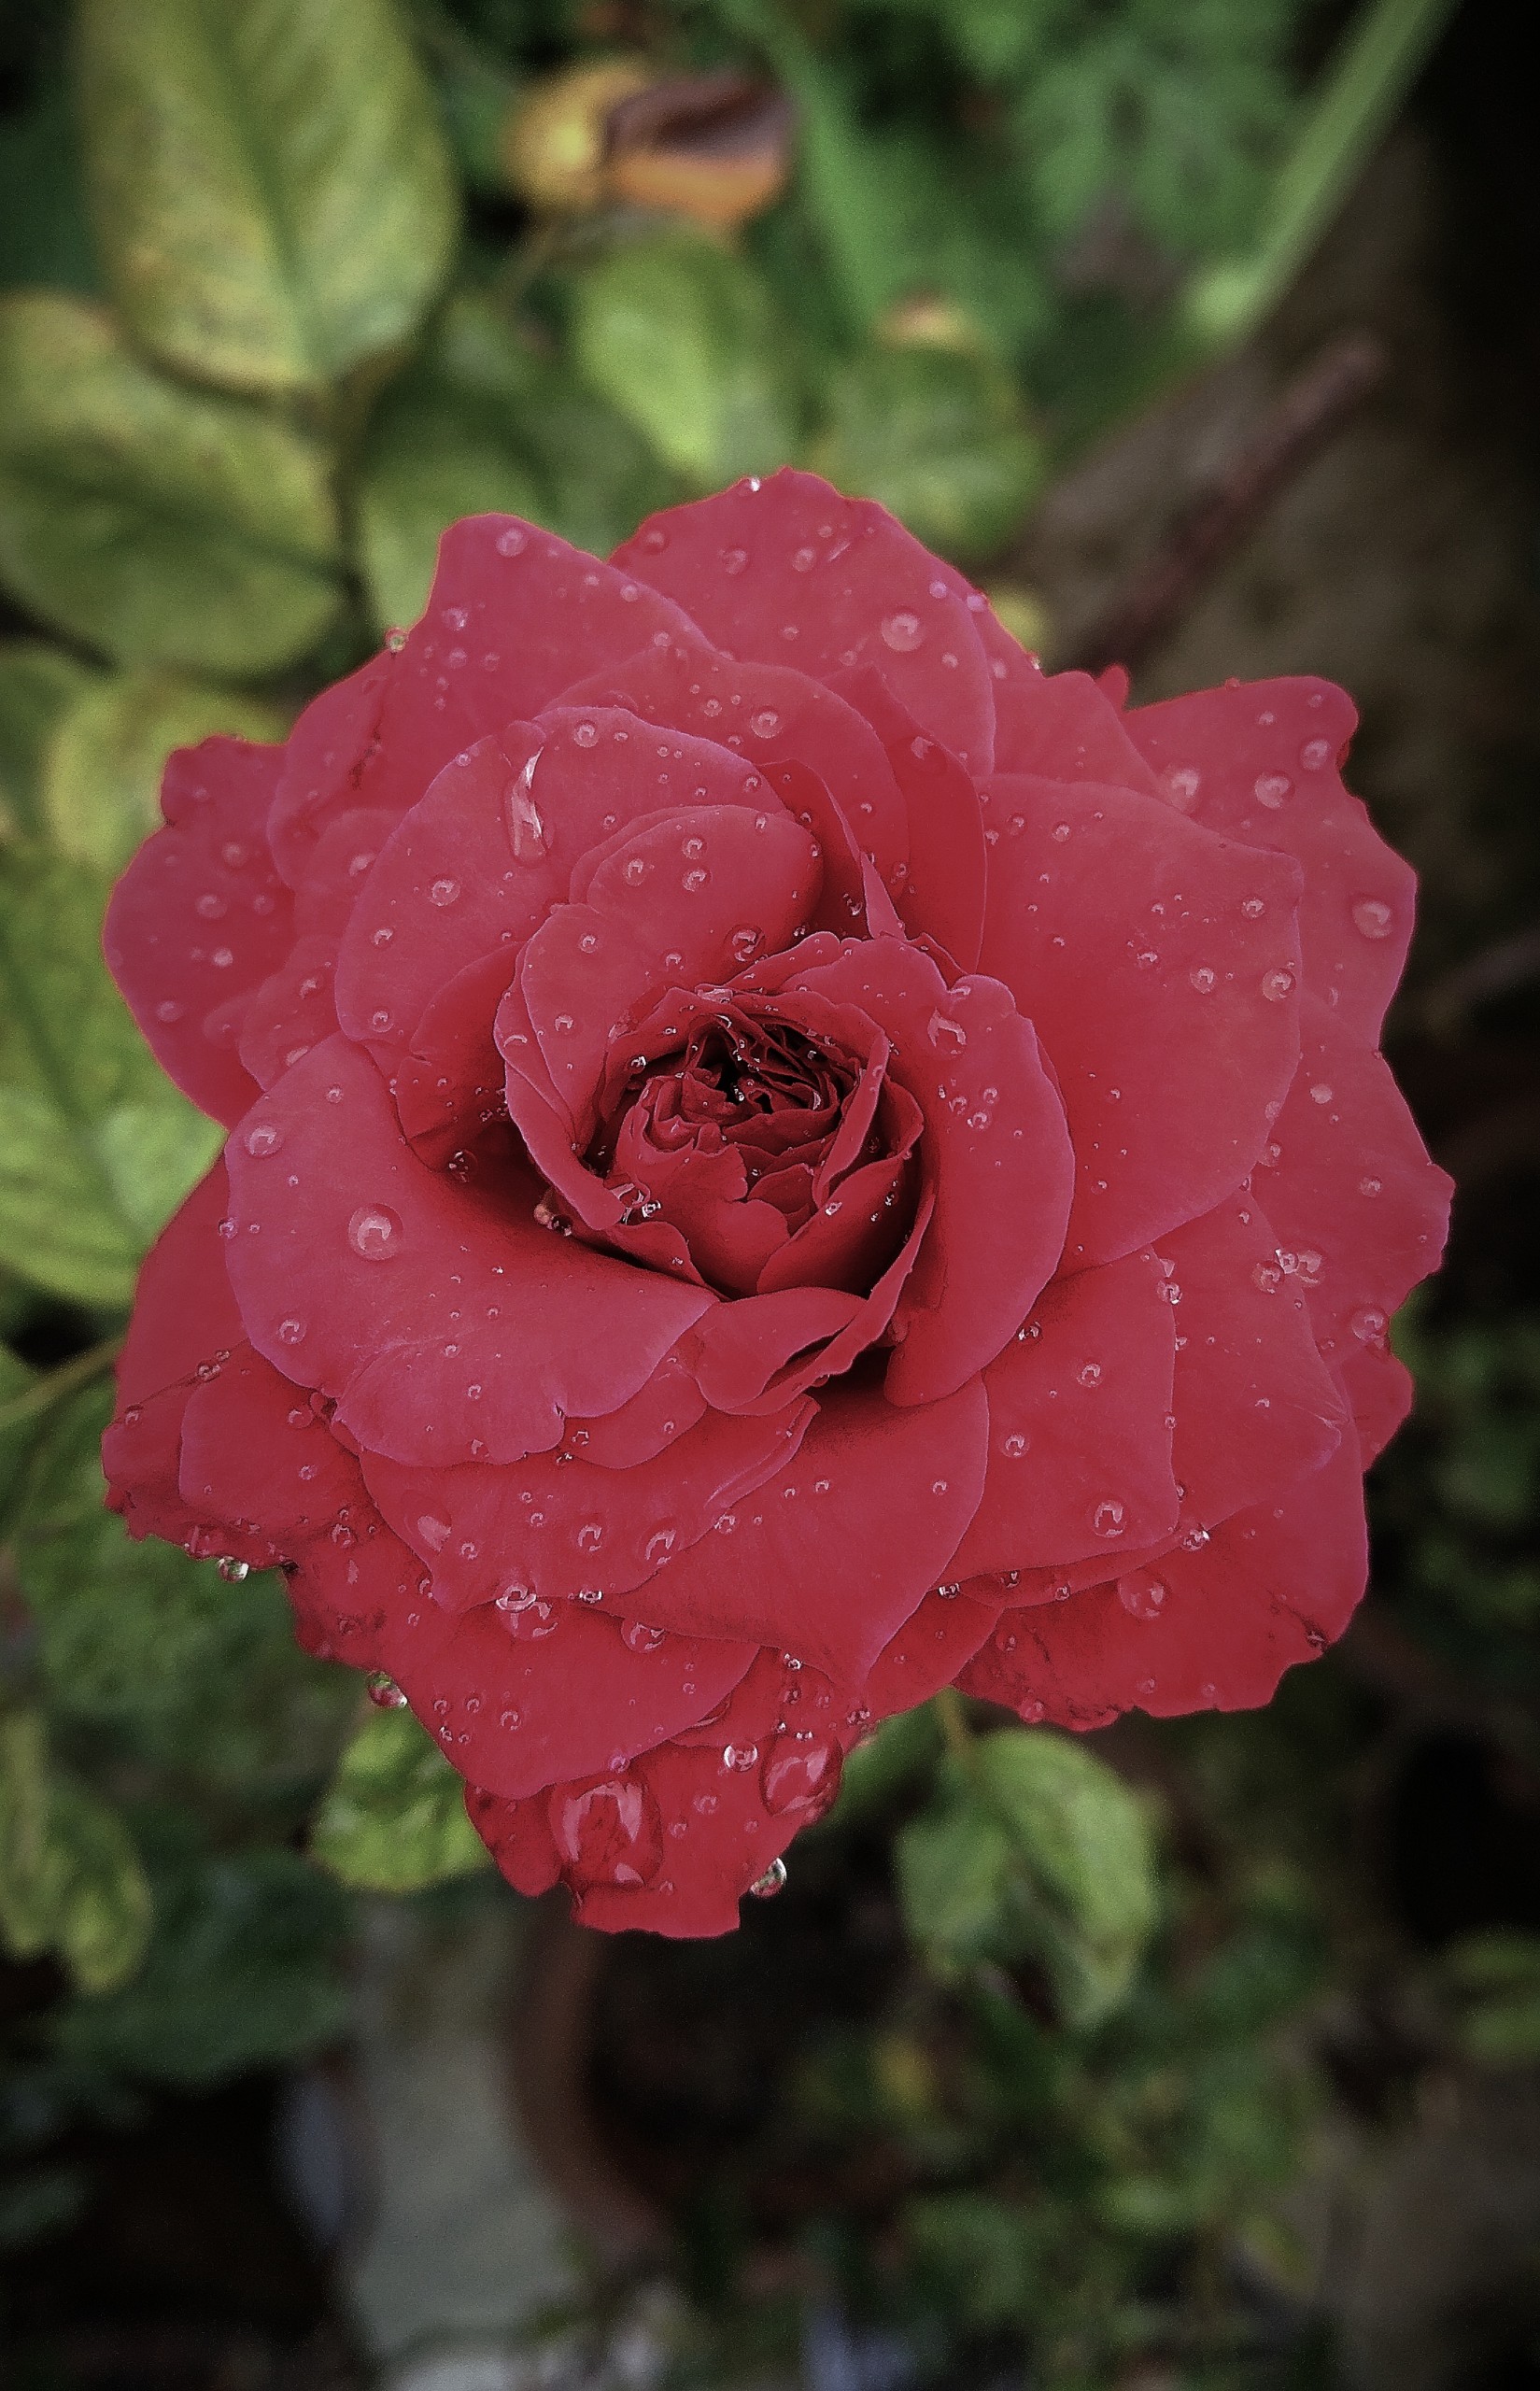 Rose Flower with Rain Droplets